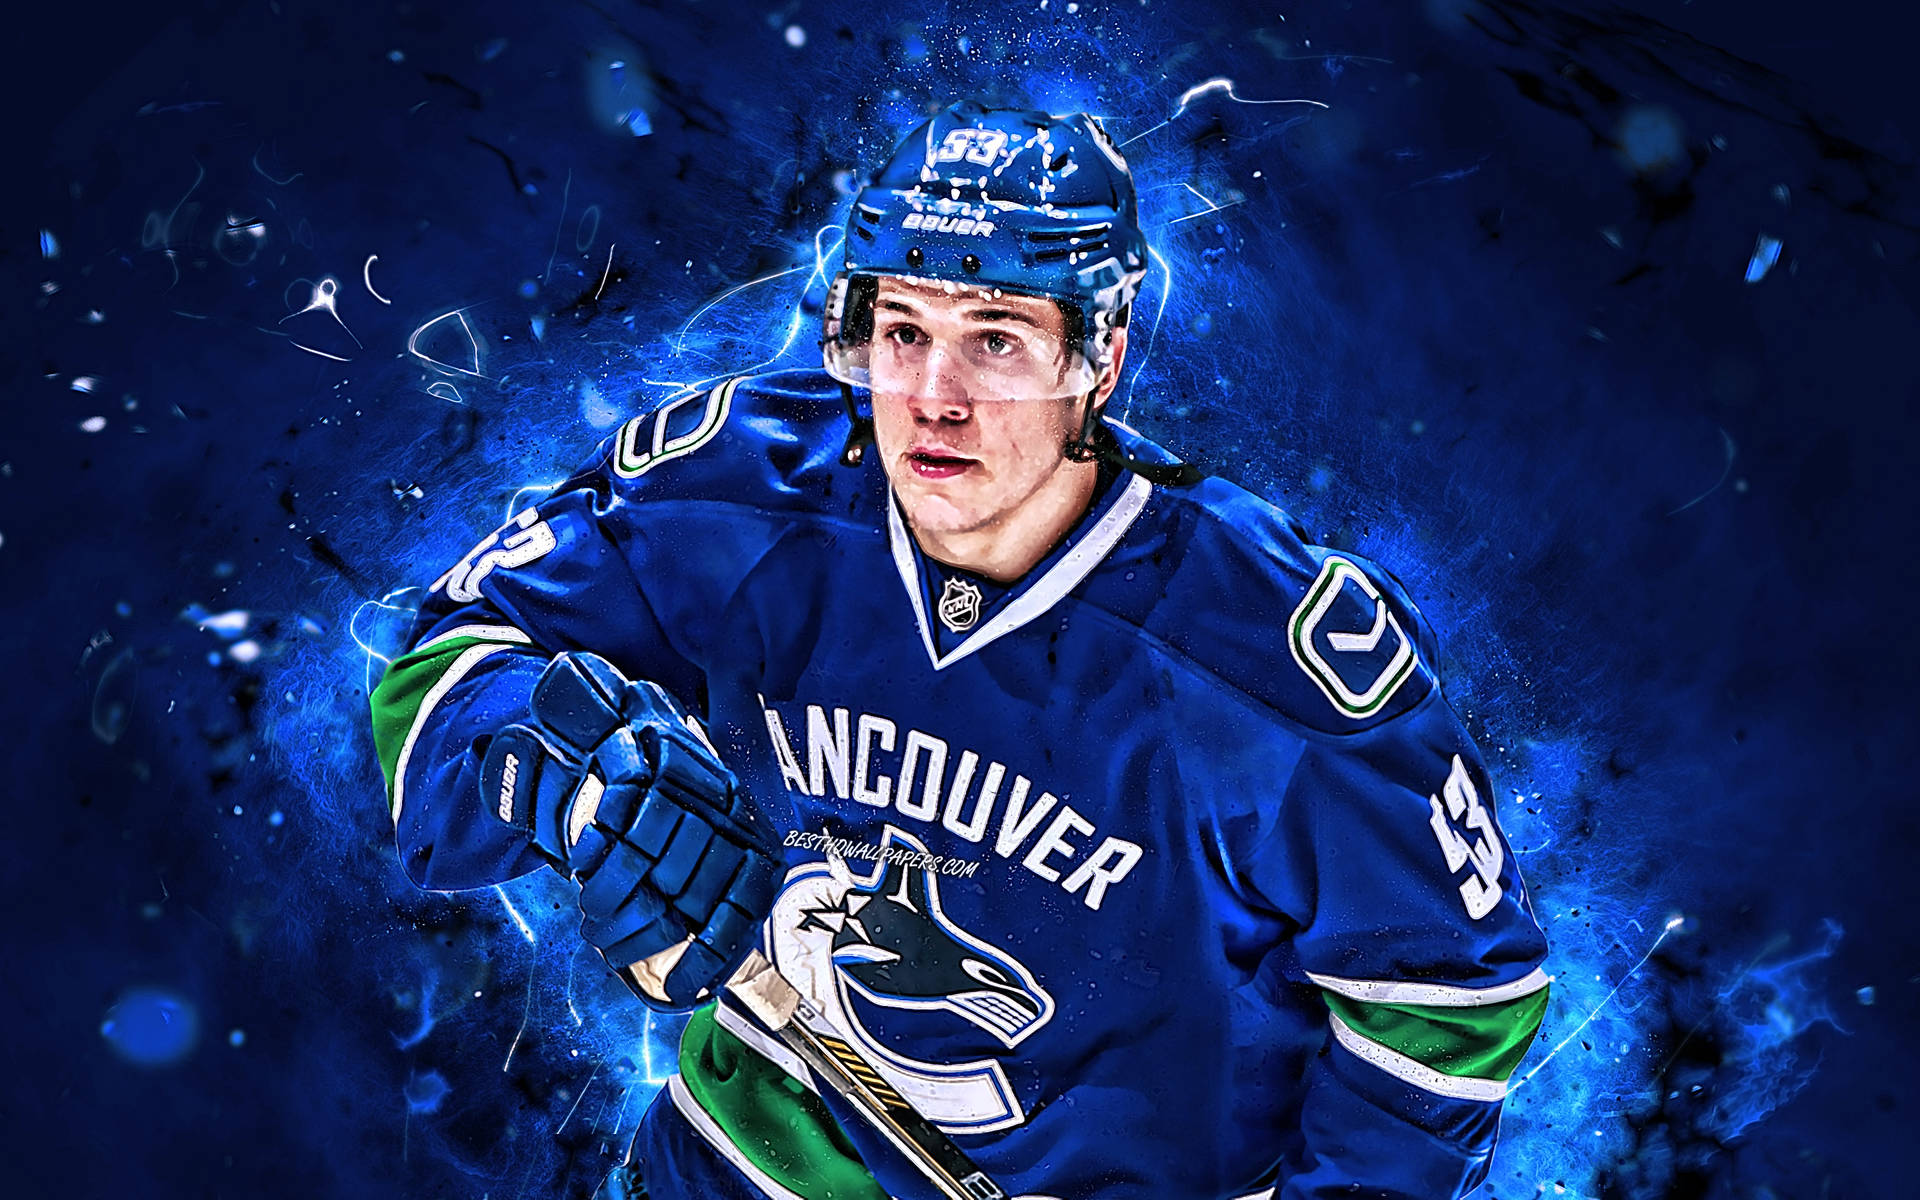 Bo Horvat wallpaper by jerepeters - Download on ZEDGE™